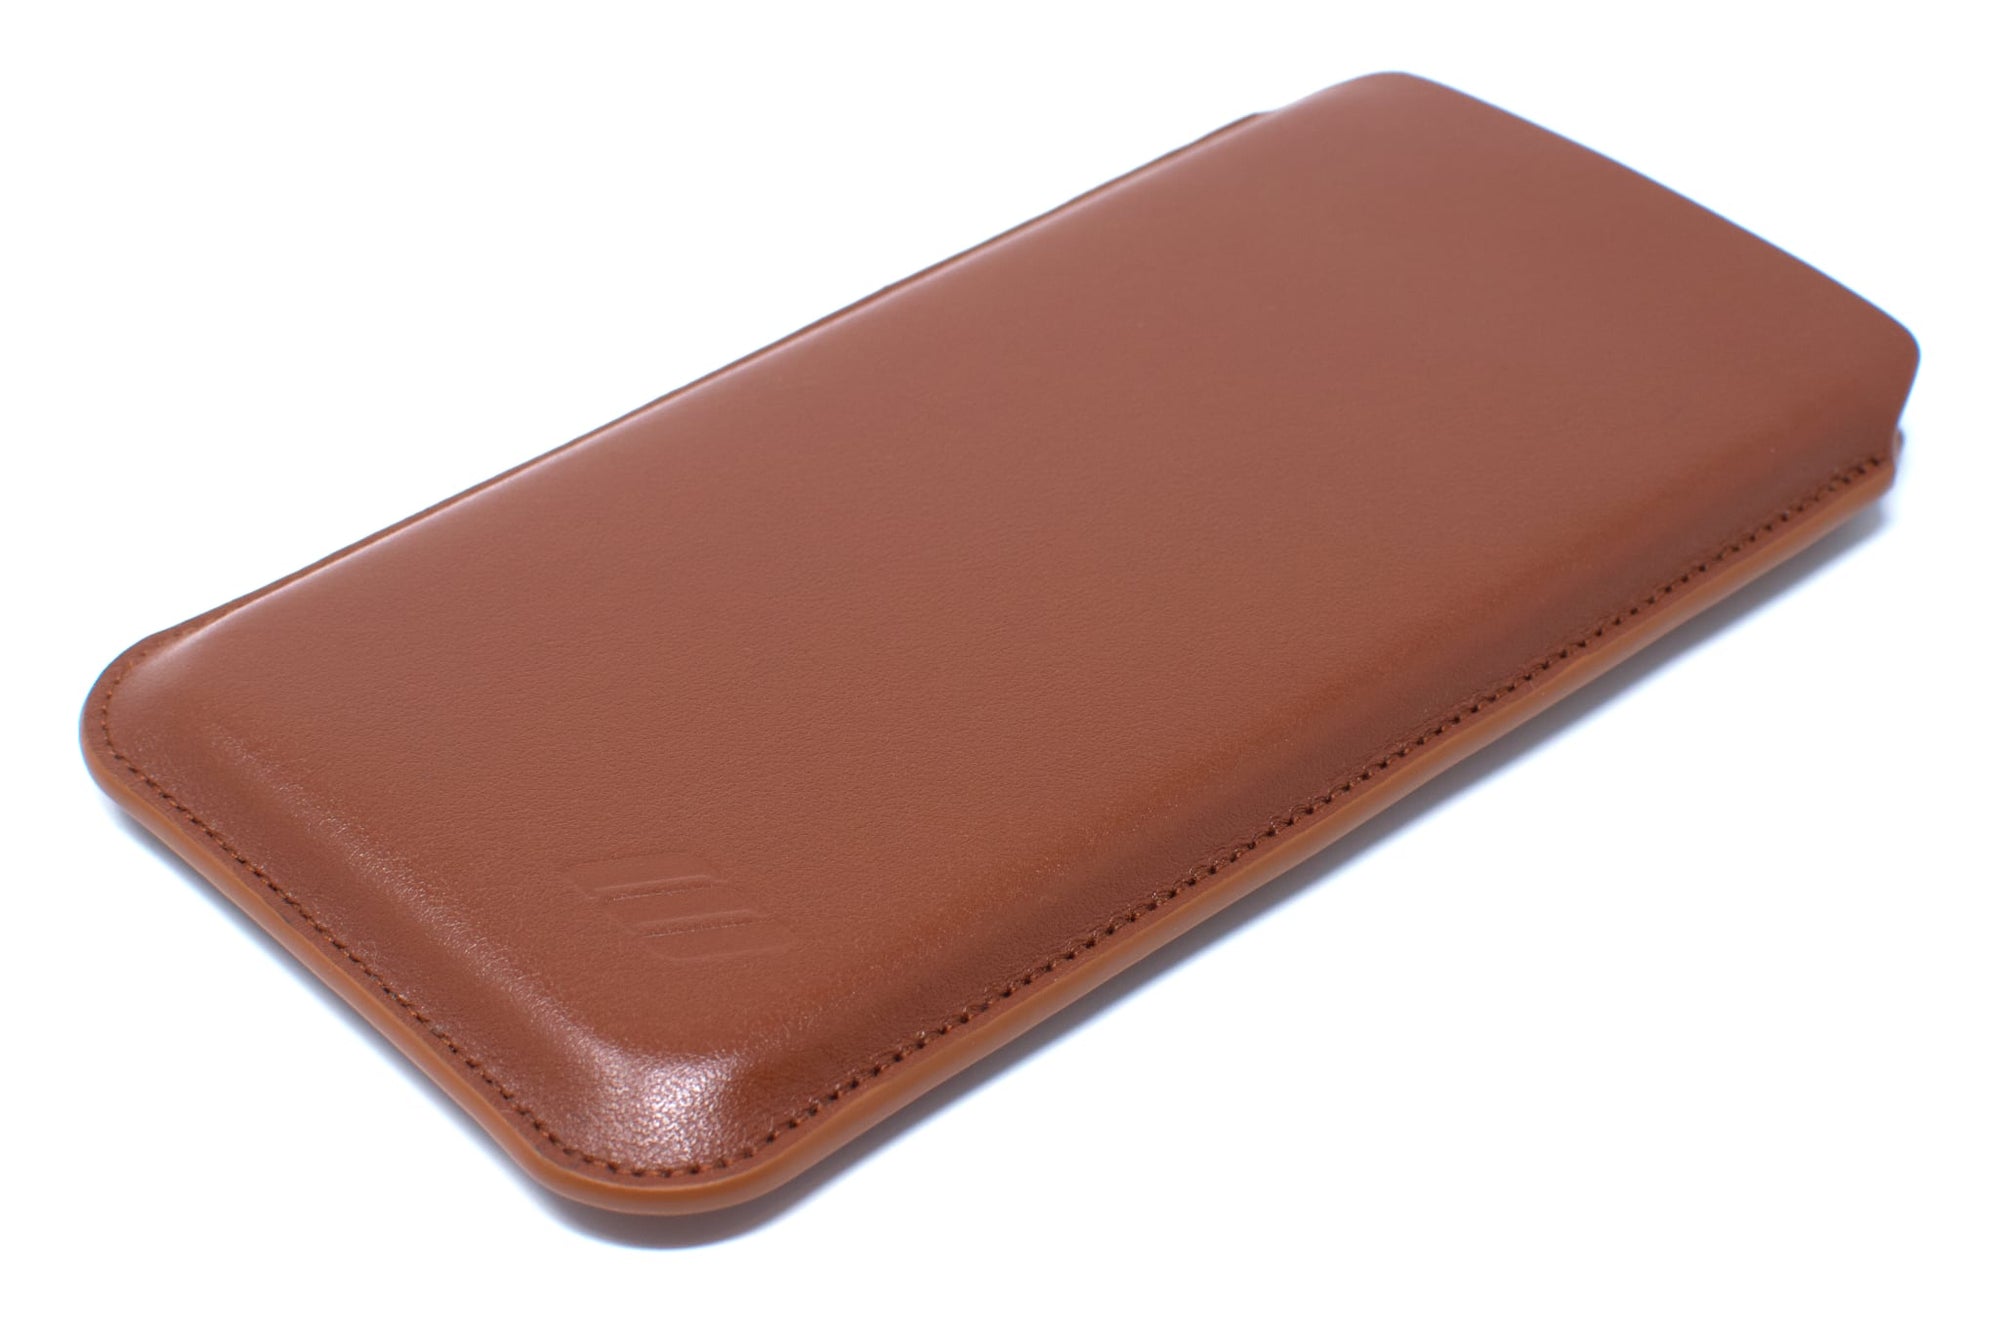 Apple iPhone 14 Pro Leather Sleeve Case - Skinny Fit - Acorn Brown